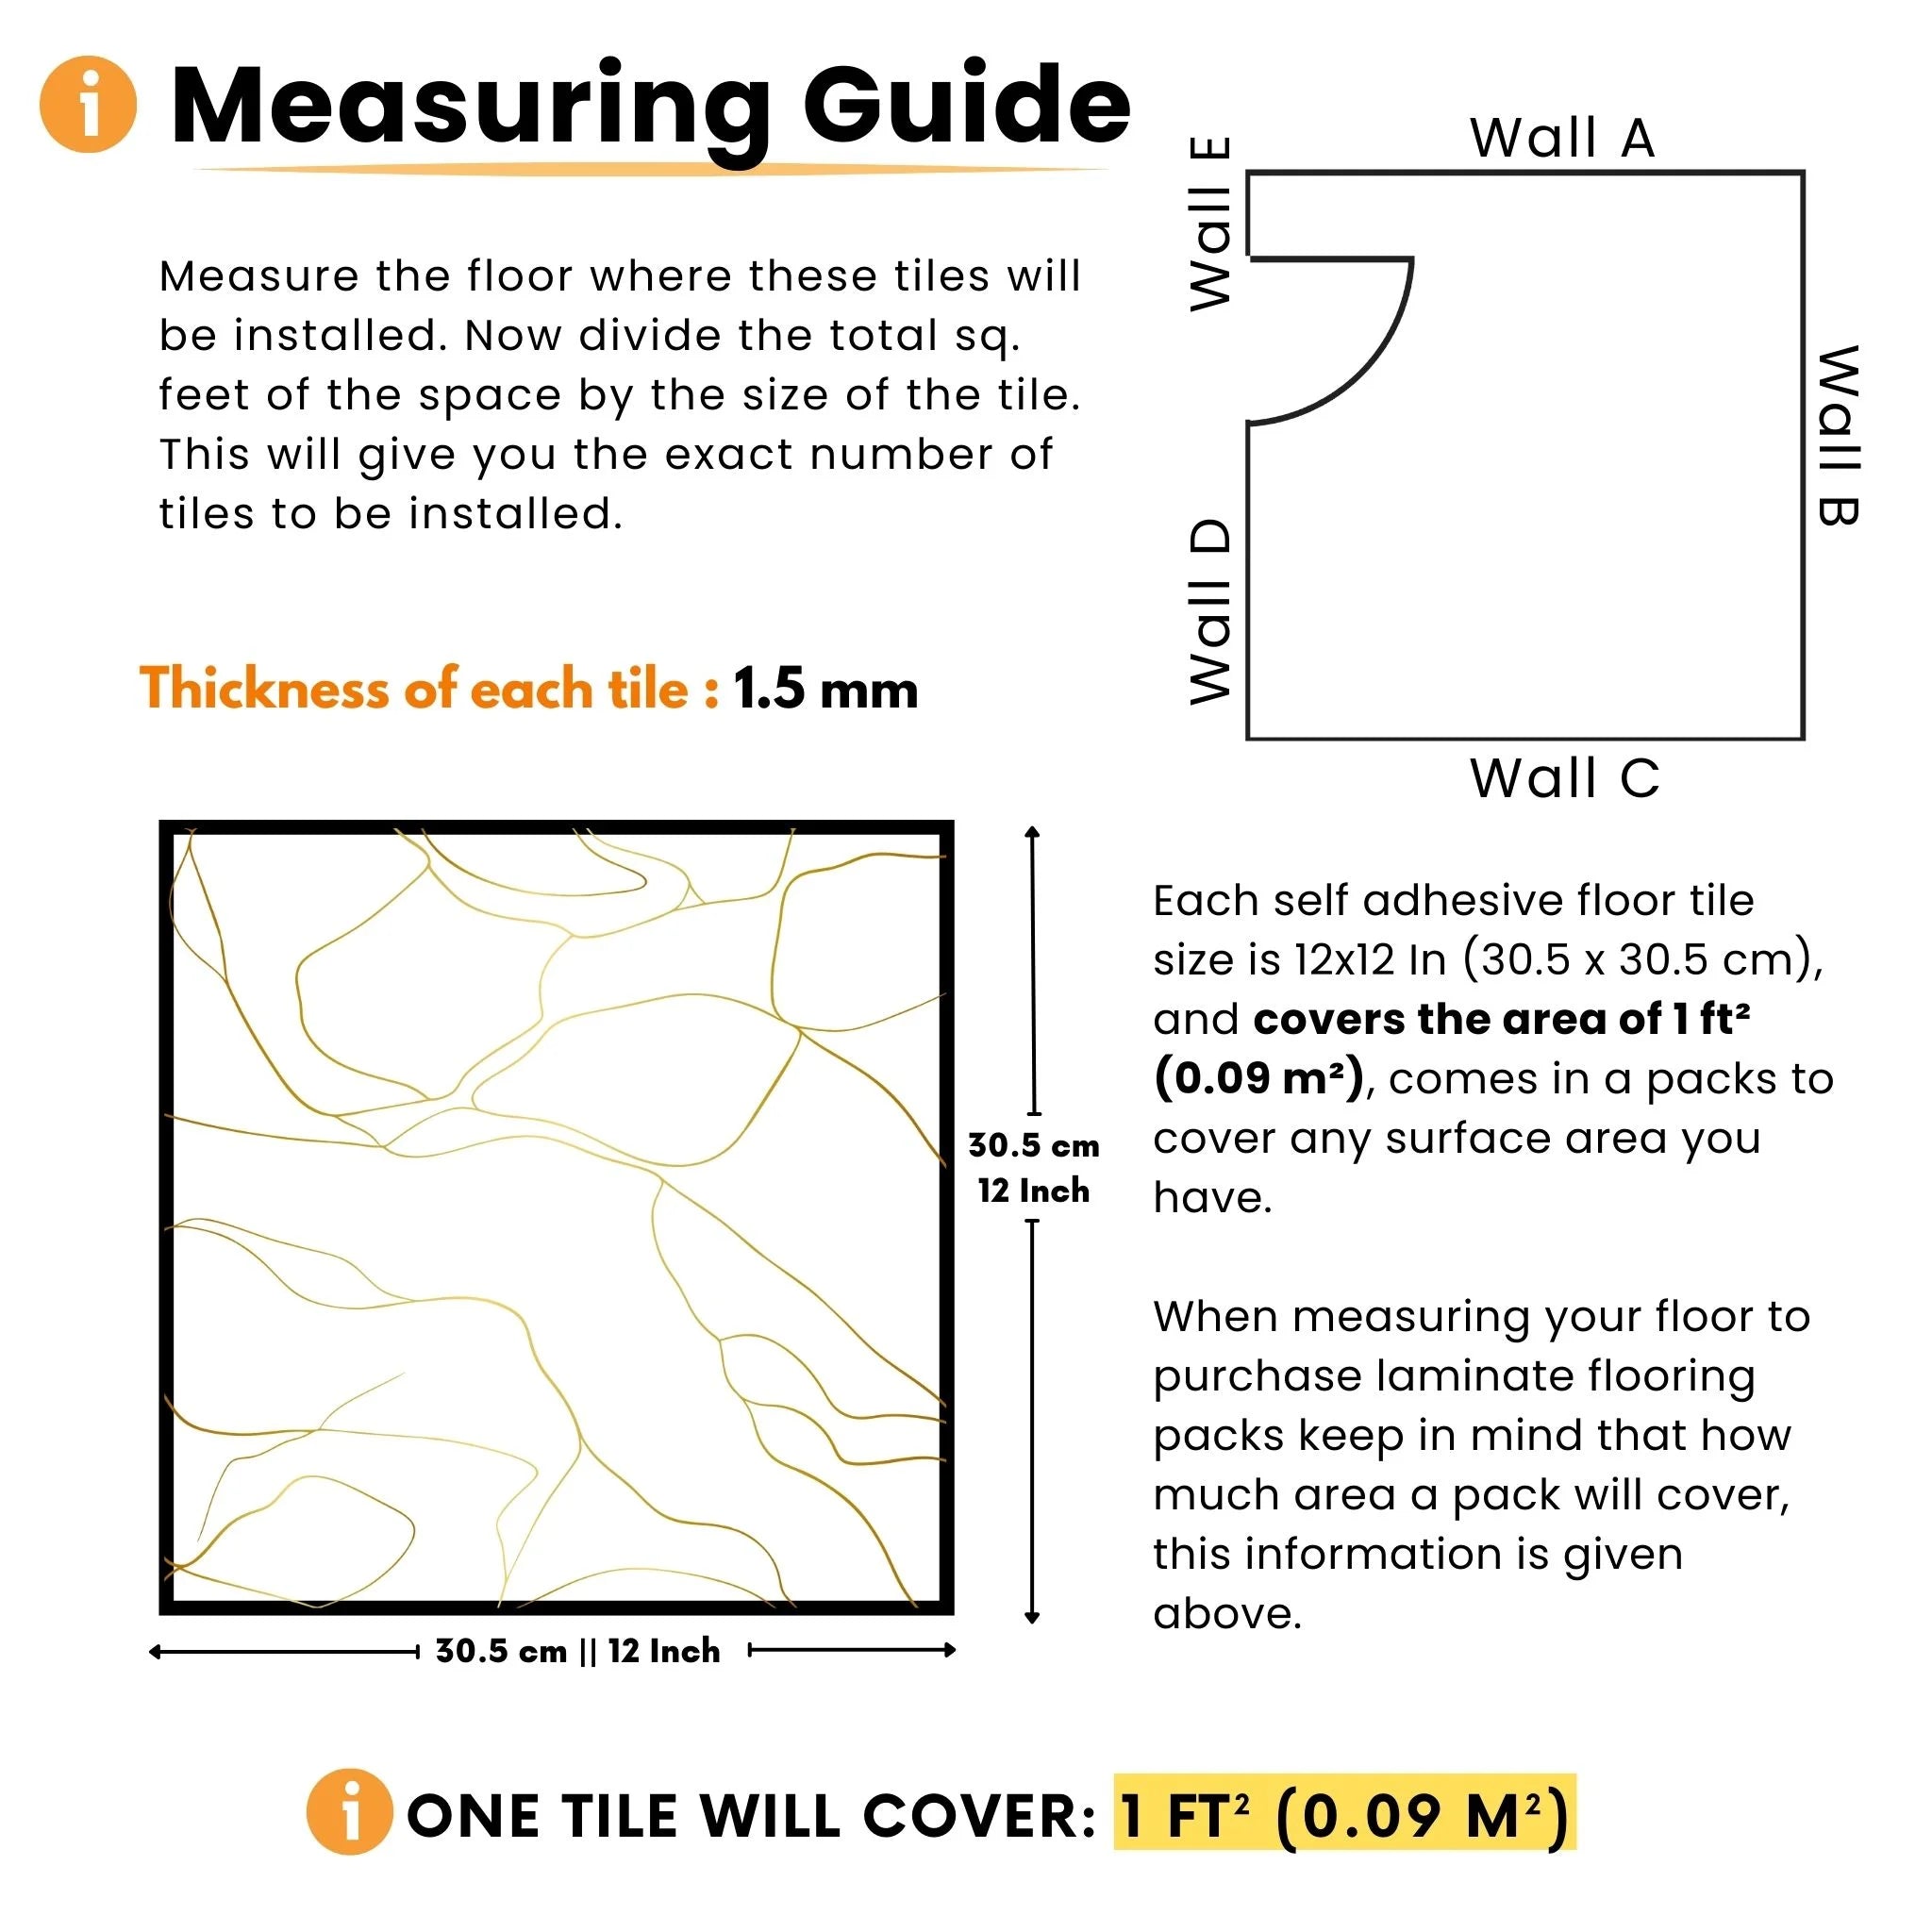 measuring guide for self-adhesive tiles with visual instructions and dimensions